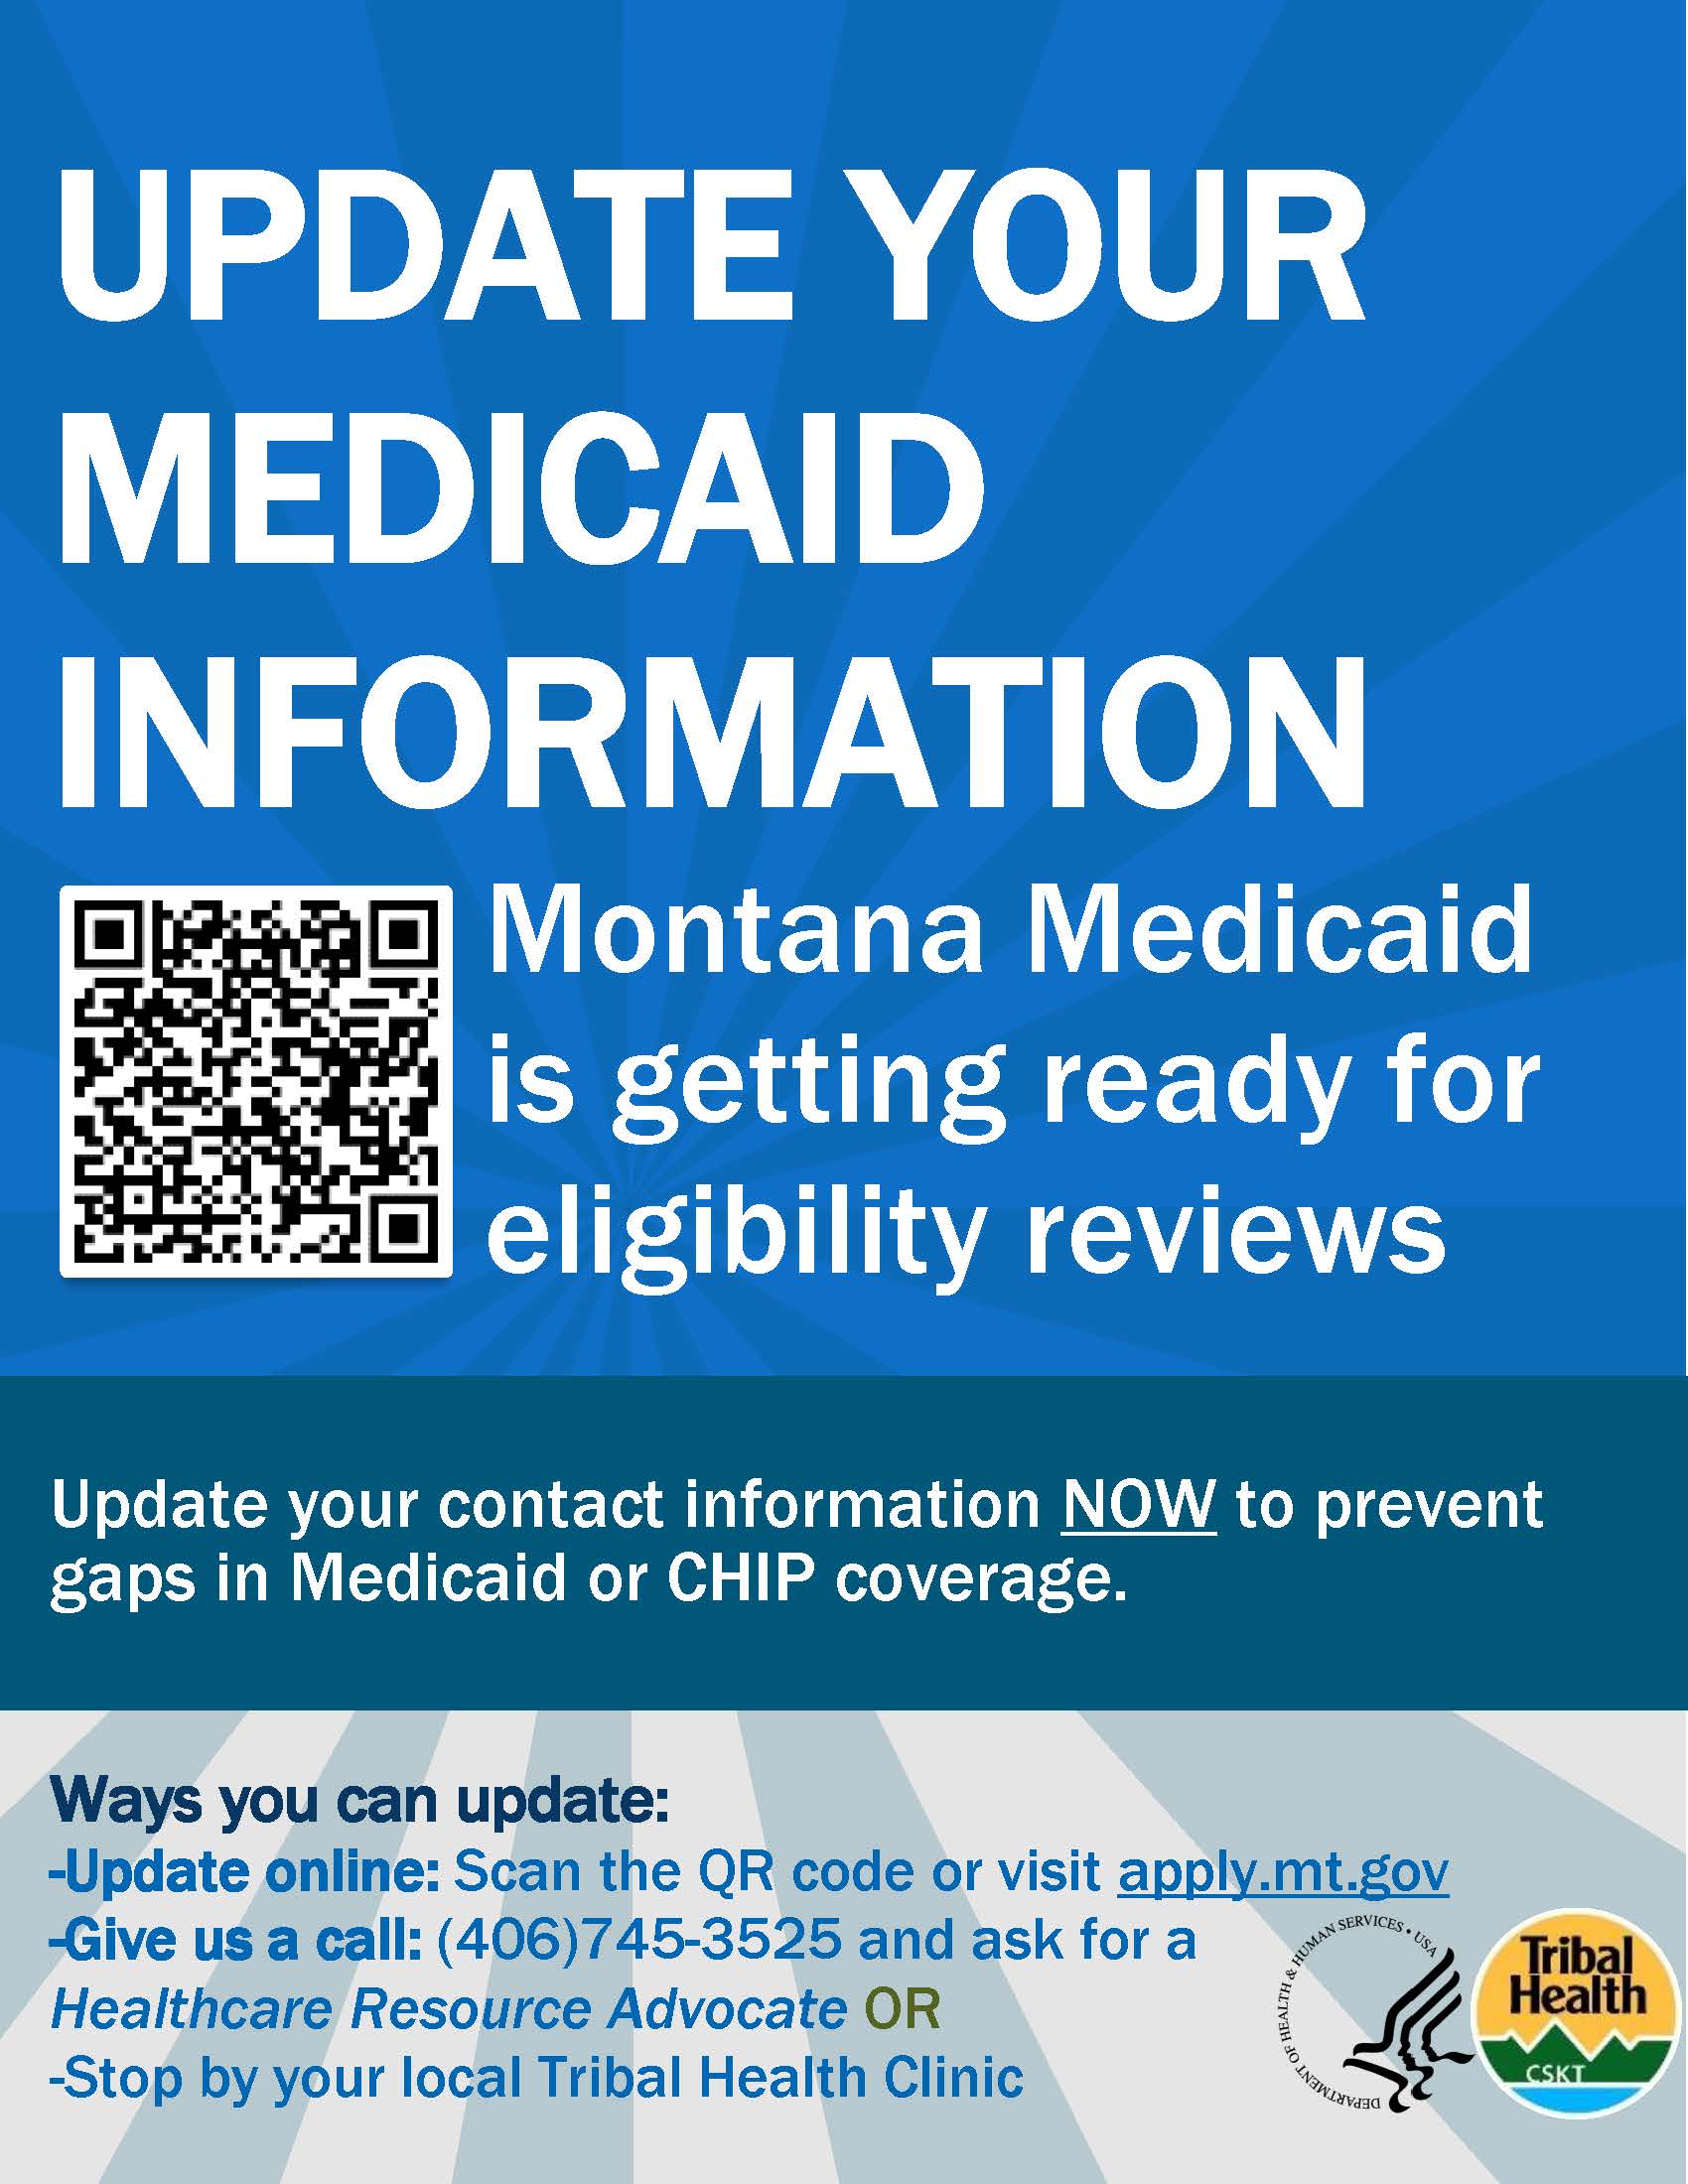 UPDATE_YOUR_MEDICAID_INFORMATION_HERE.jpg